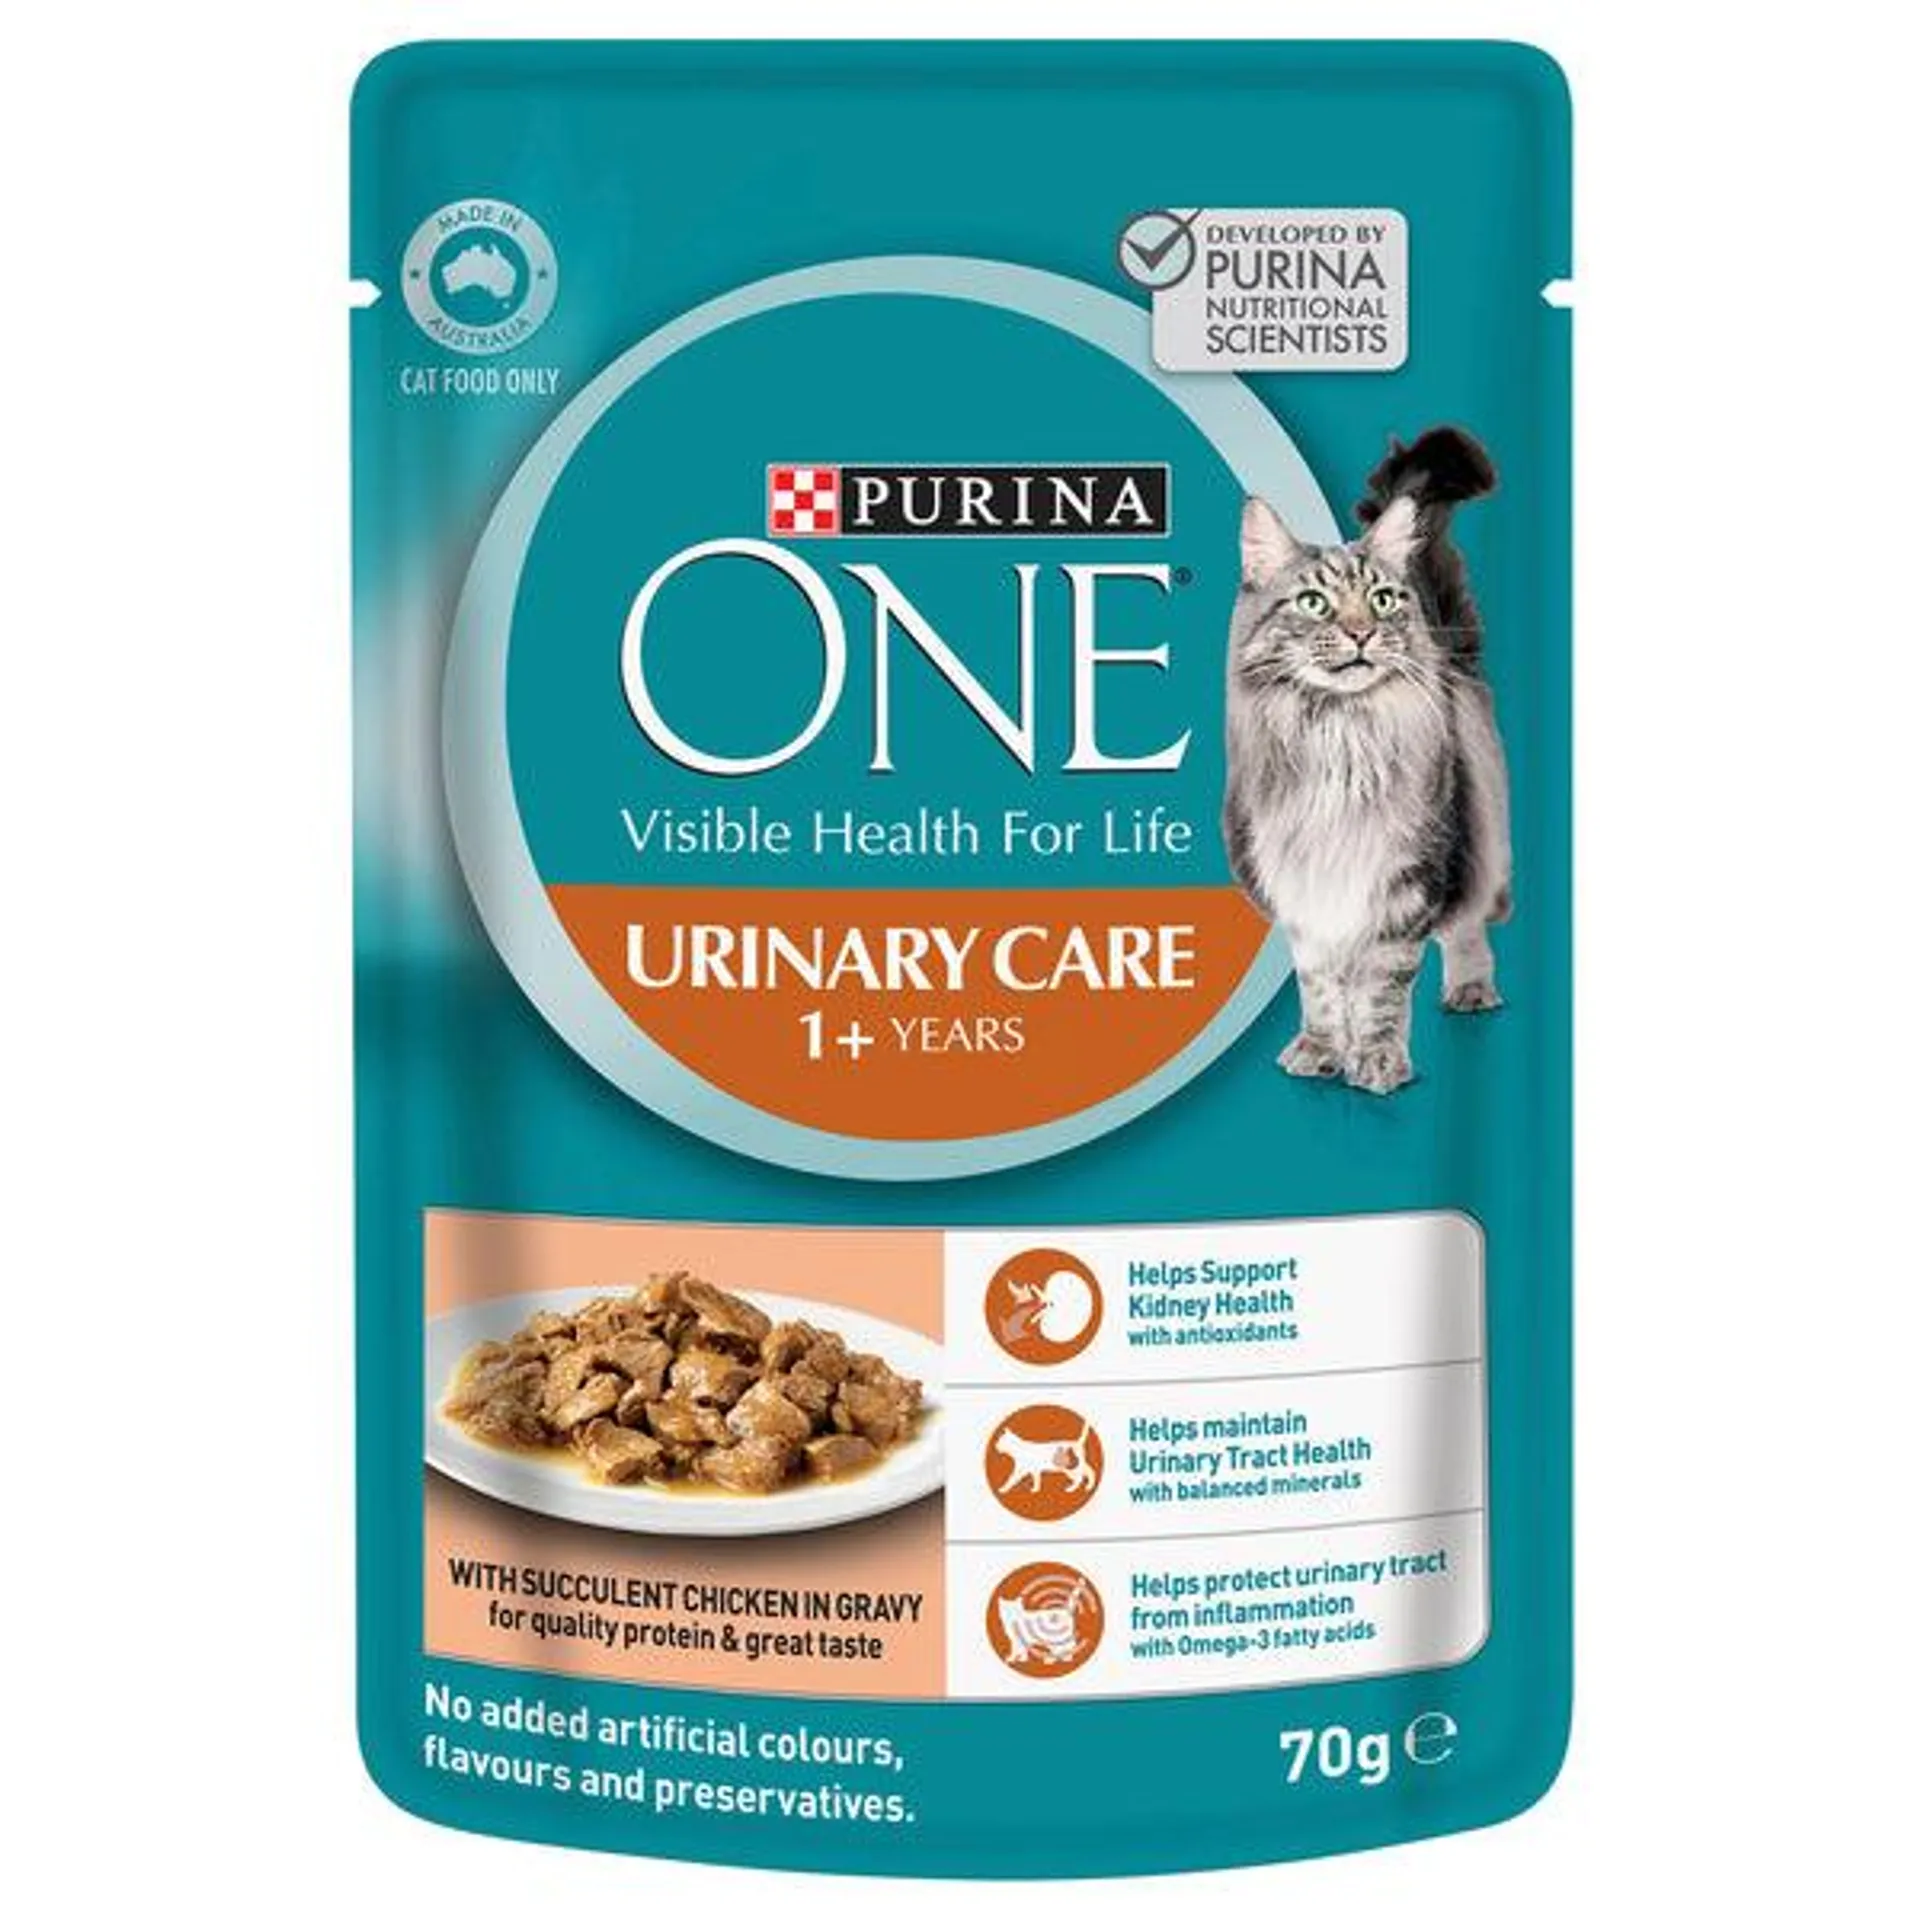 PURINA ONE - Urinary Care Cat Wet Food (12pk x 70g)